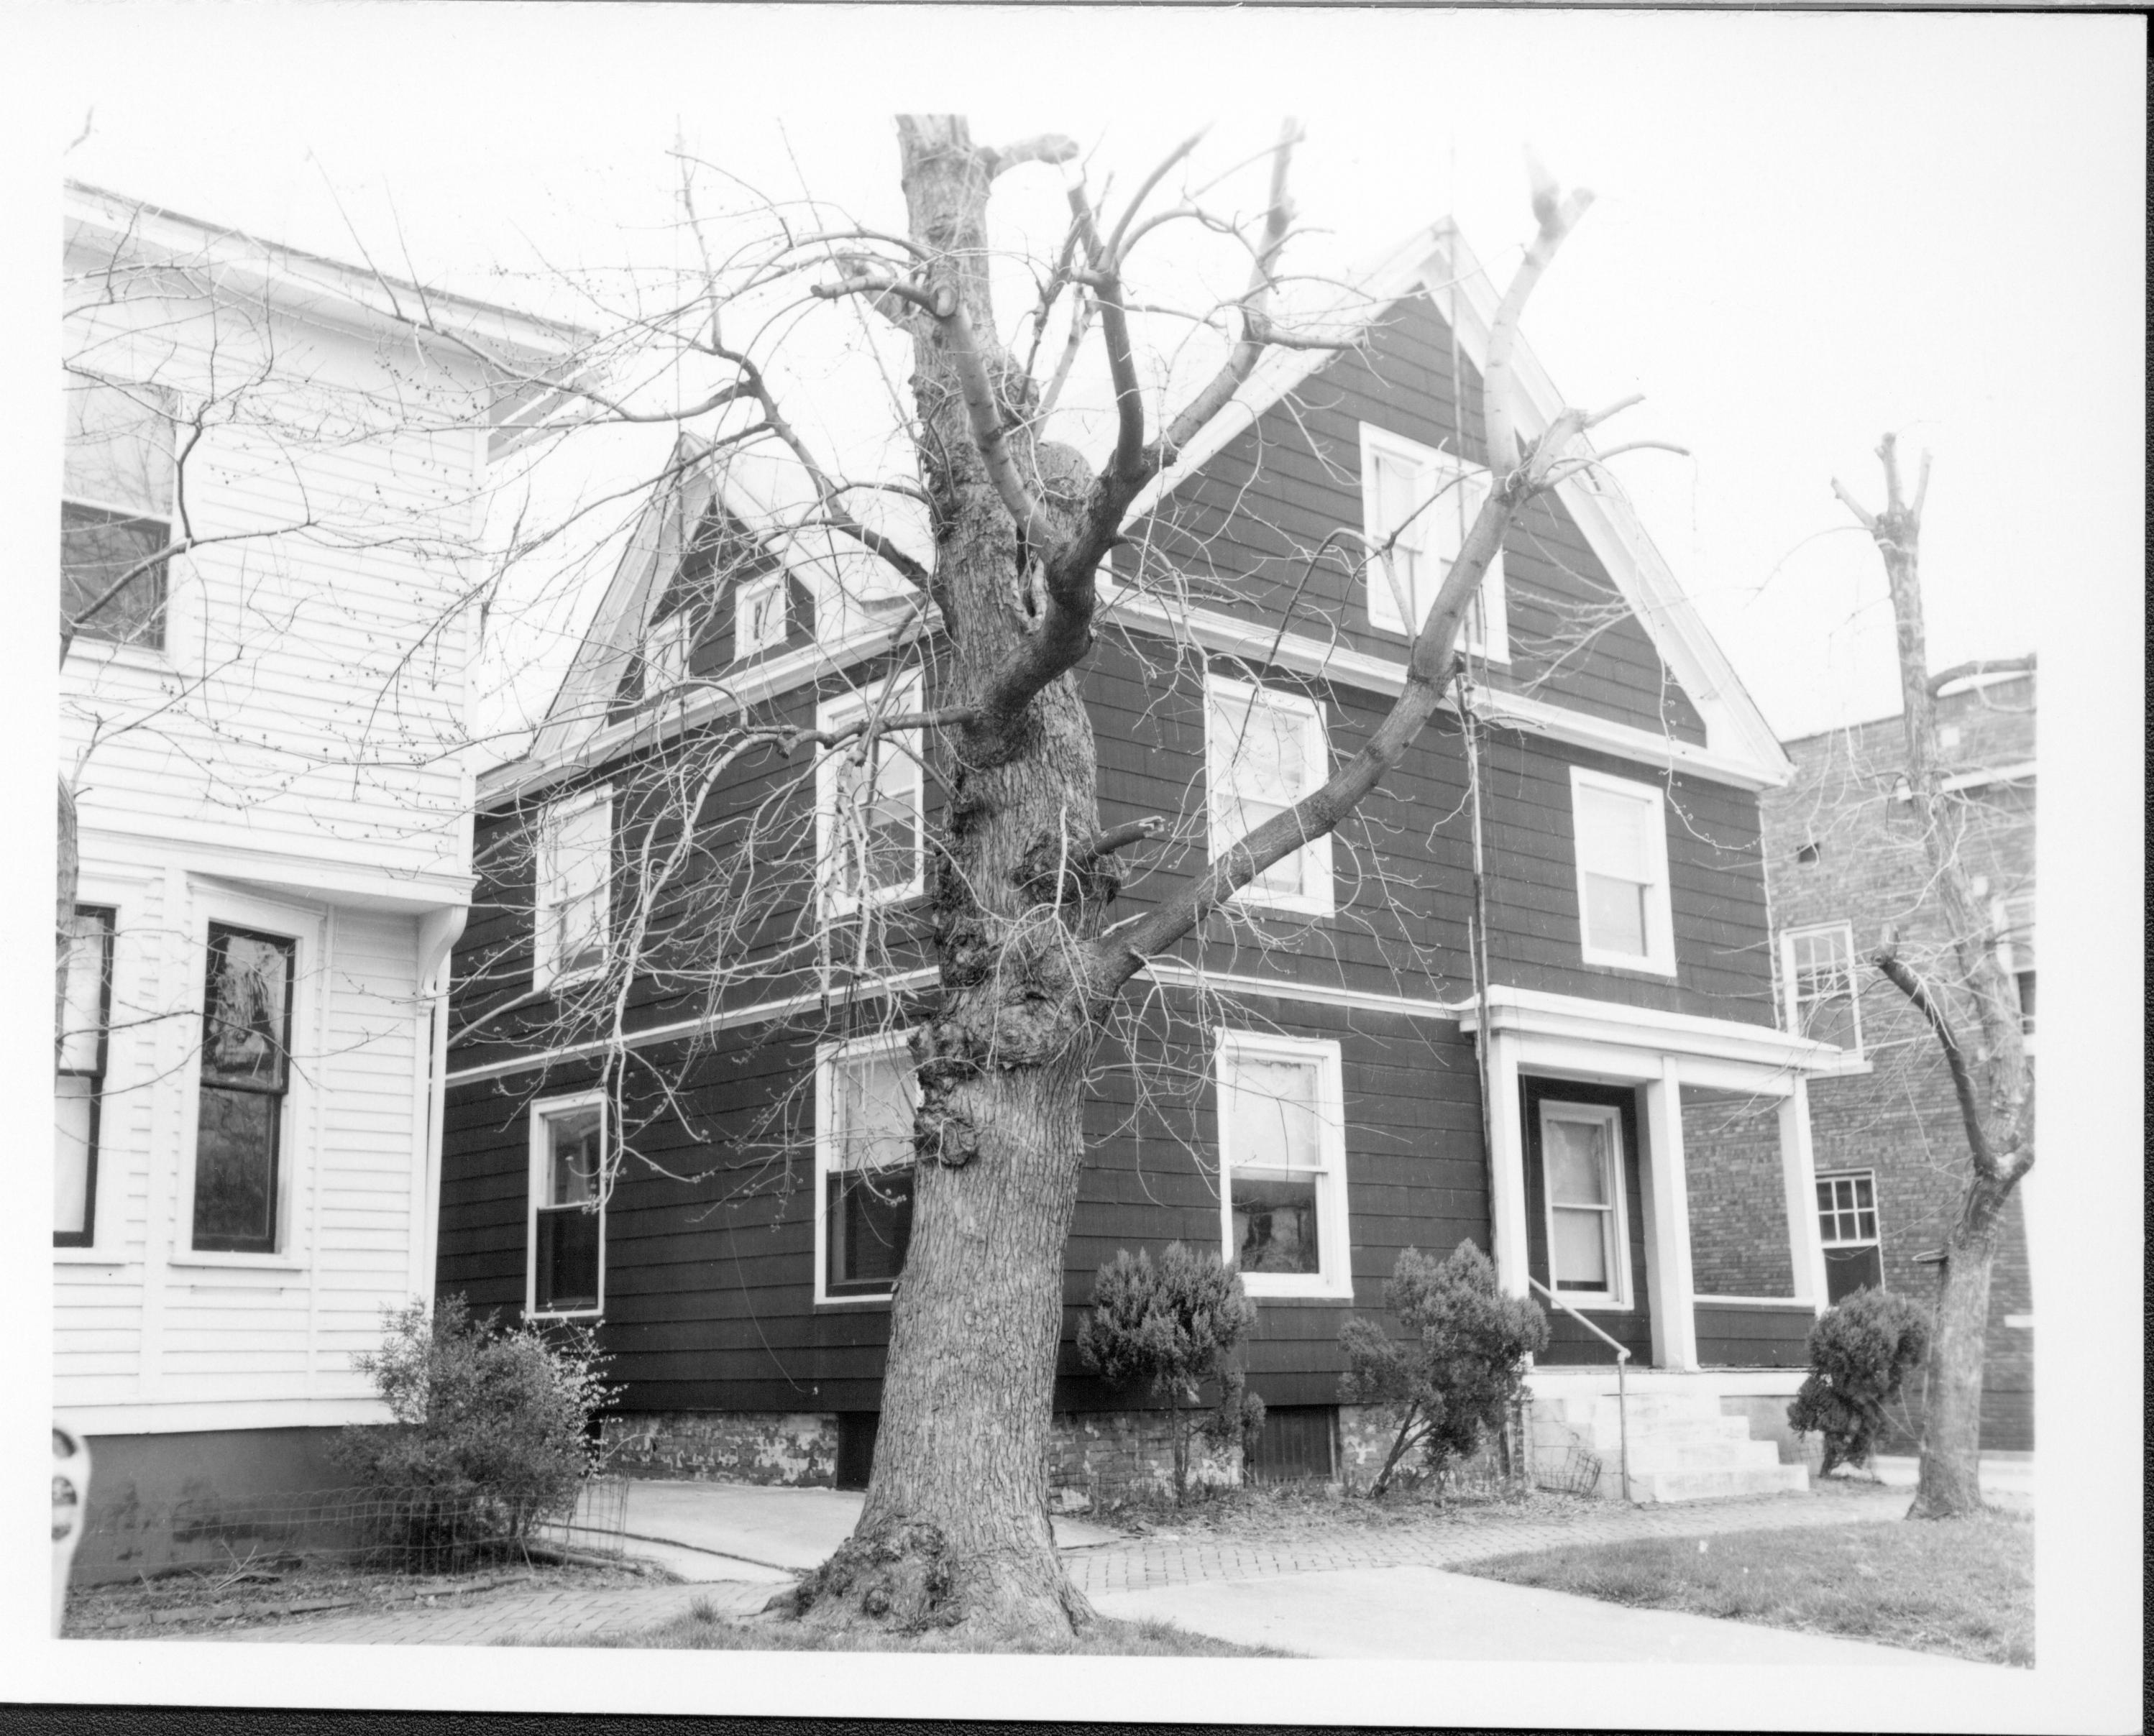 House owned by William Hermes in use as apartments, Block 7, Lot 8 along Jackson Street.  House on left owned by William Sheeham.  Brick building on right owned by Herman Hofferkamp.  Area is now Visitor Center Looking Northeast from Jackson Street. Hermes, Sheeham, Hofferkamp, Jackson Street, Visitor Center